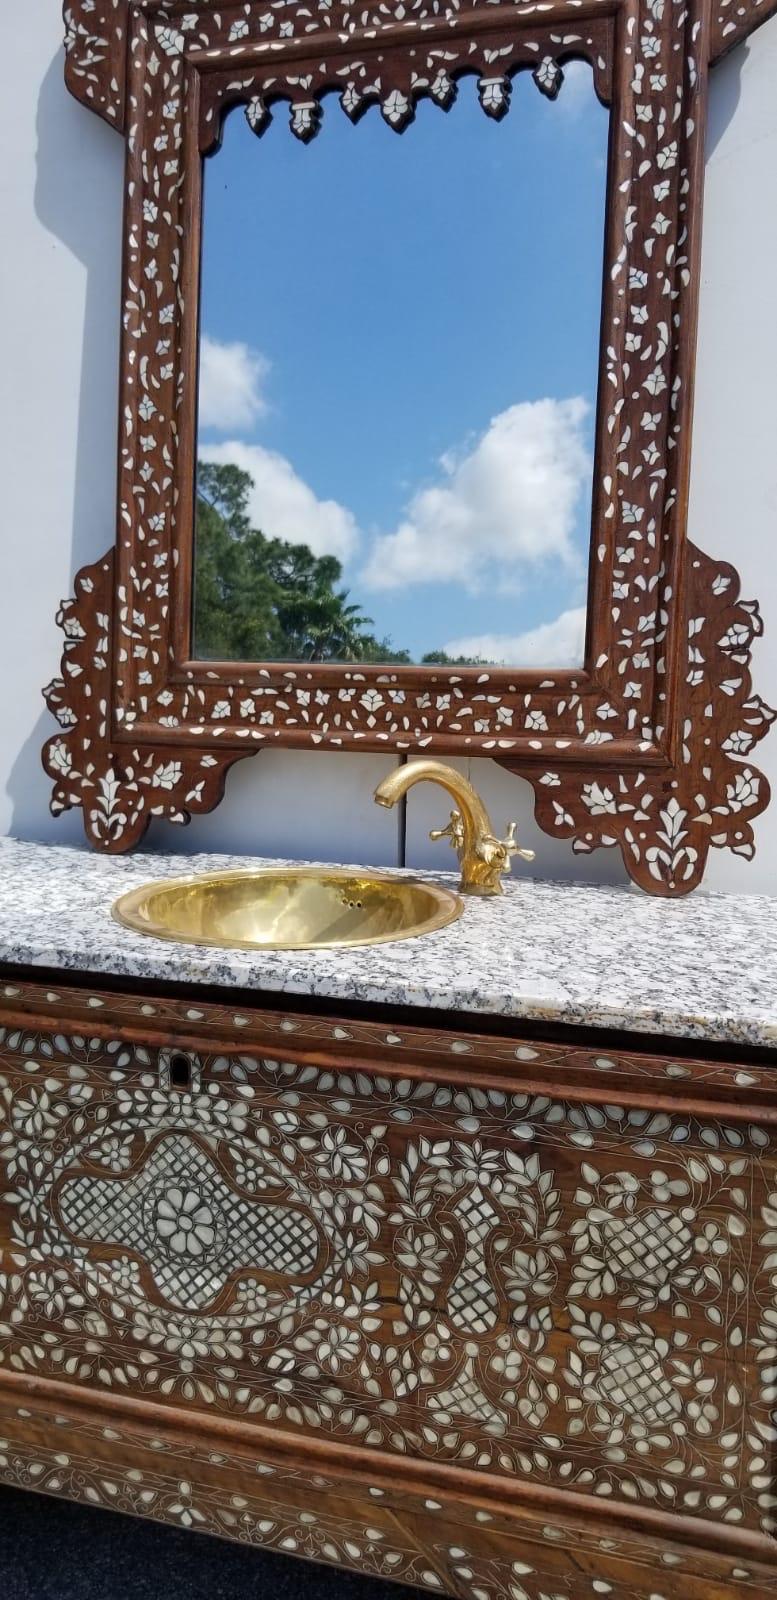 Beautiful 19th century Middle Eastern mother of pearl vanity and mirror. Old Syrian wedding chest Re- purposed into a sink vanity and mirror set. The chest is walnut and mother of pearl with a beautiful matching mother of pearl mirror. Measures: